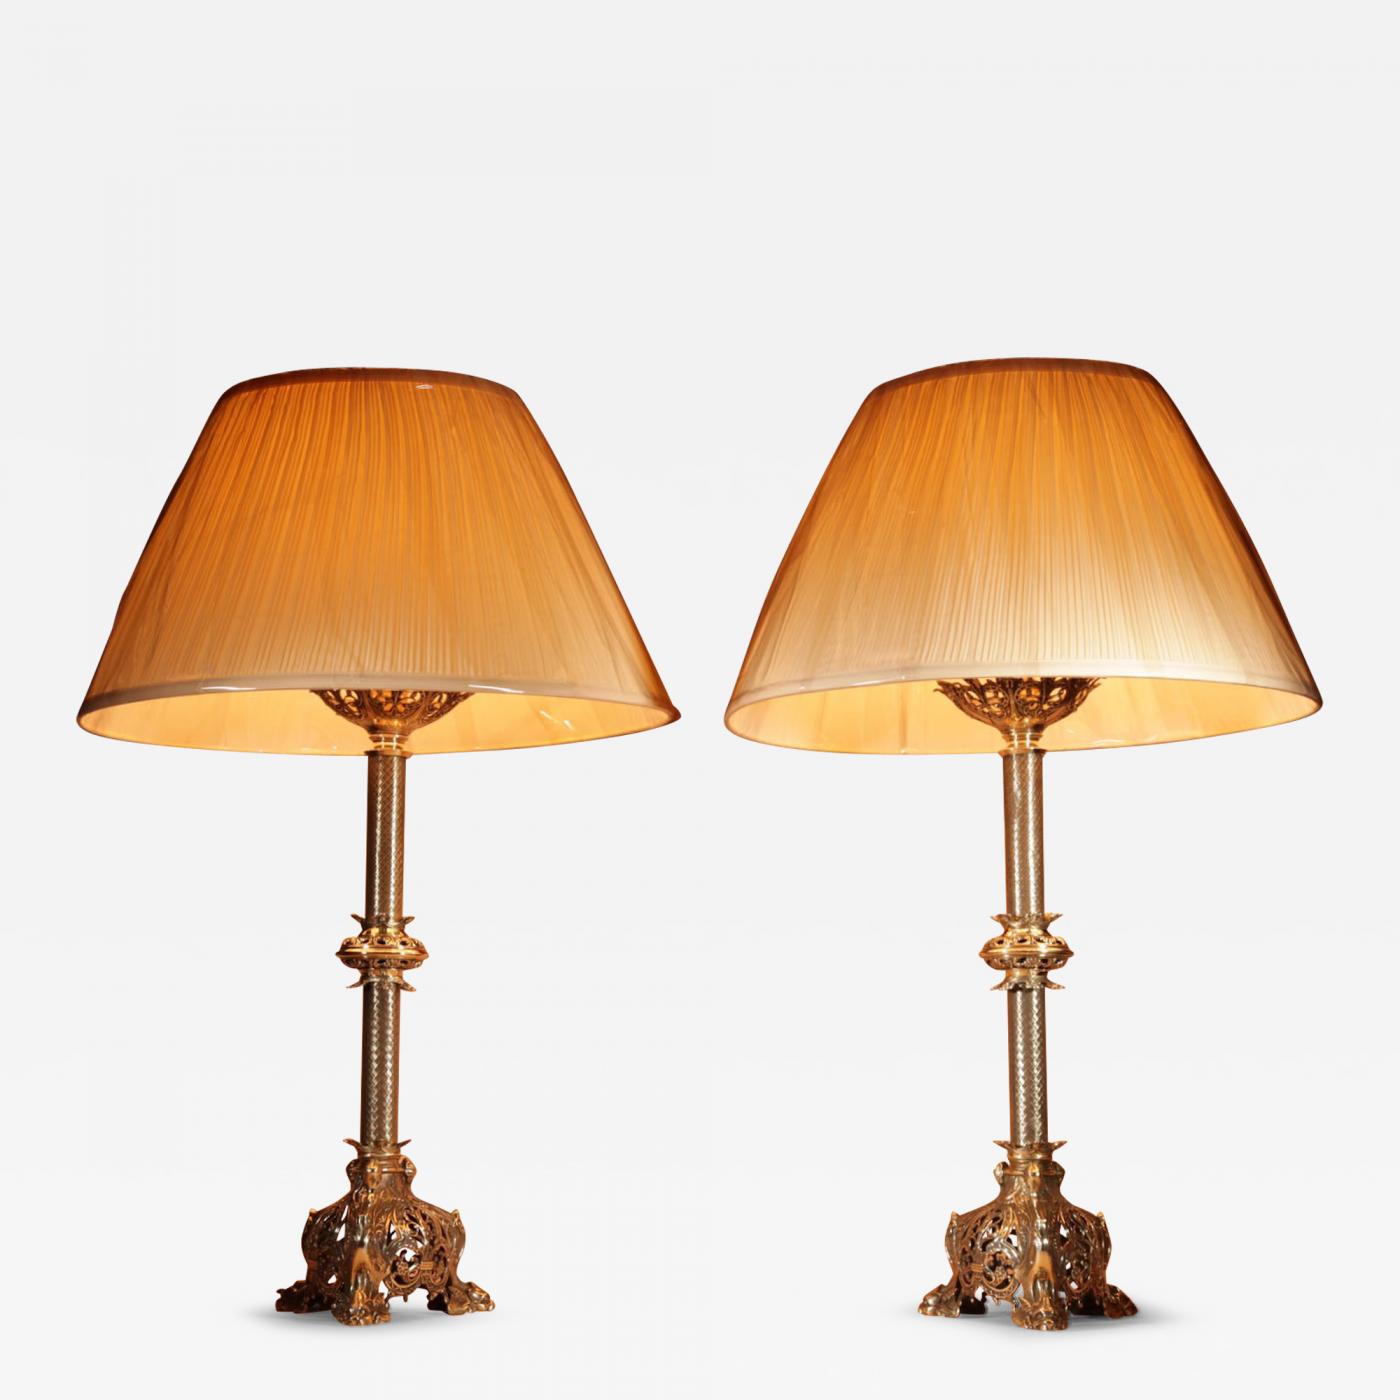 A Pair Of Impressive Fine Cast Brass Table lamps, In The early Gothic Style.